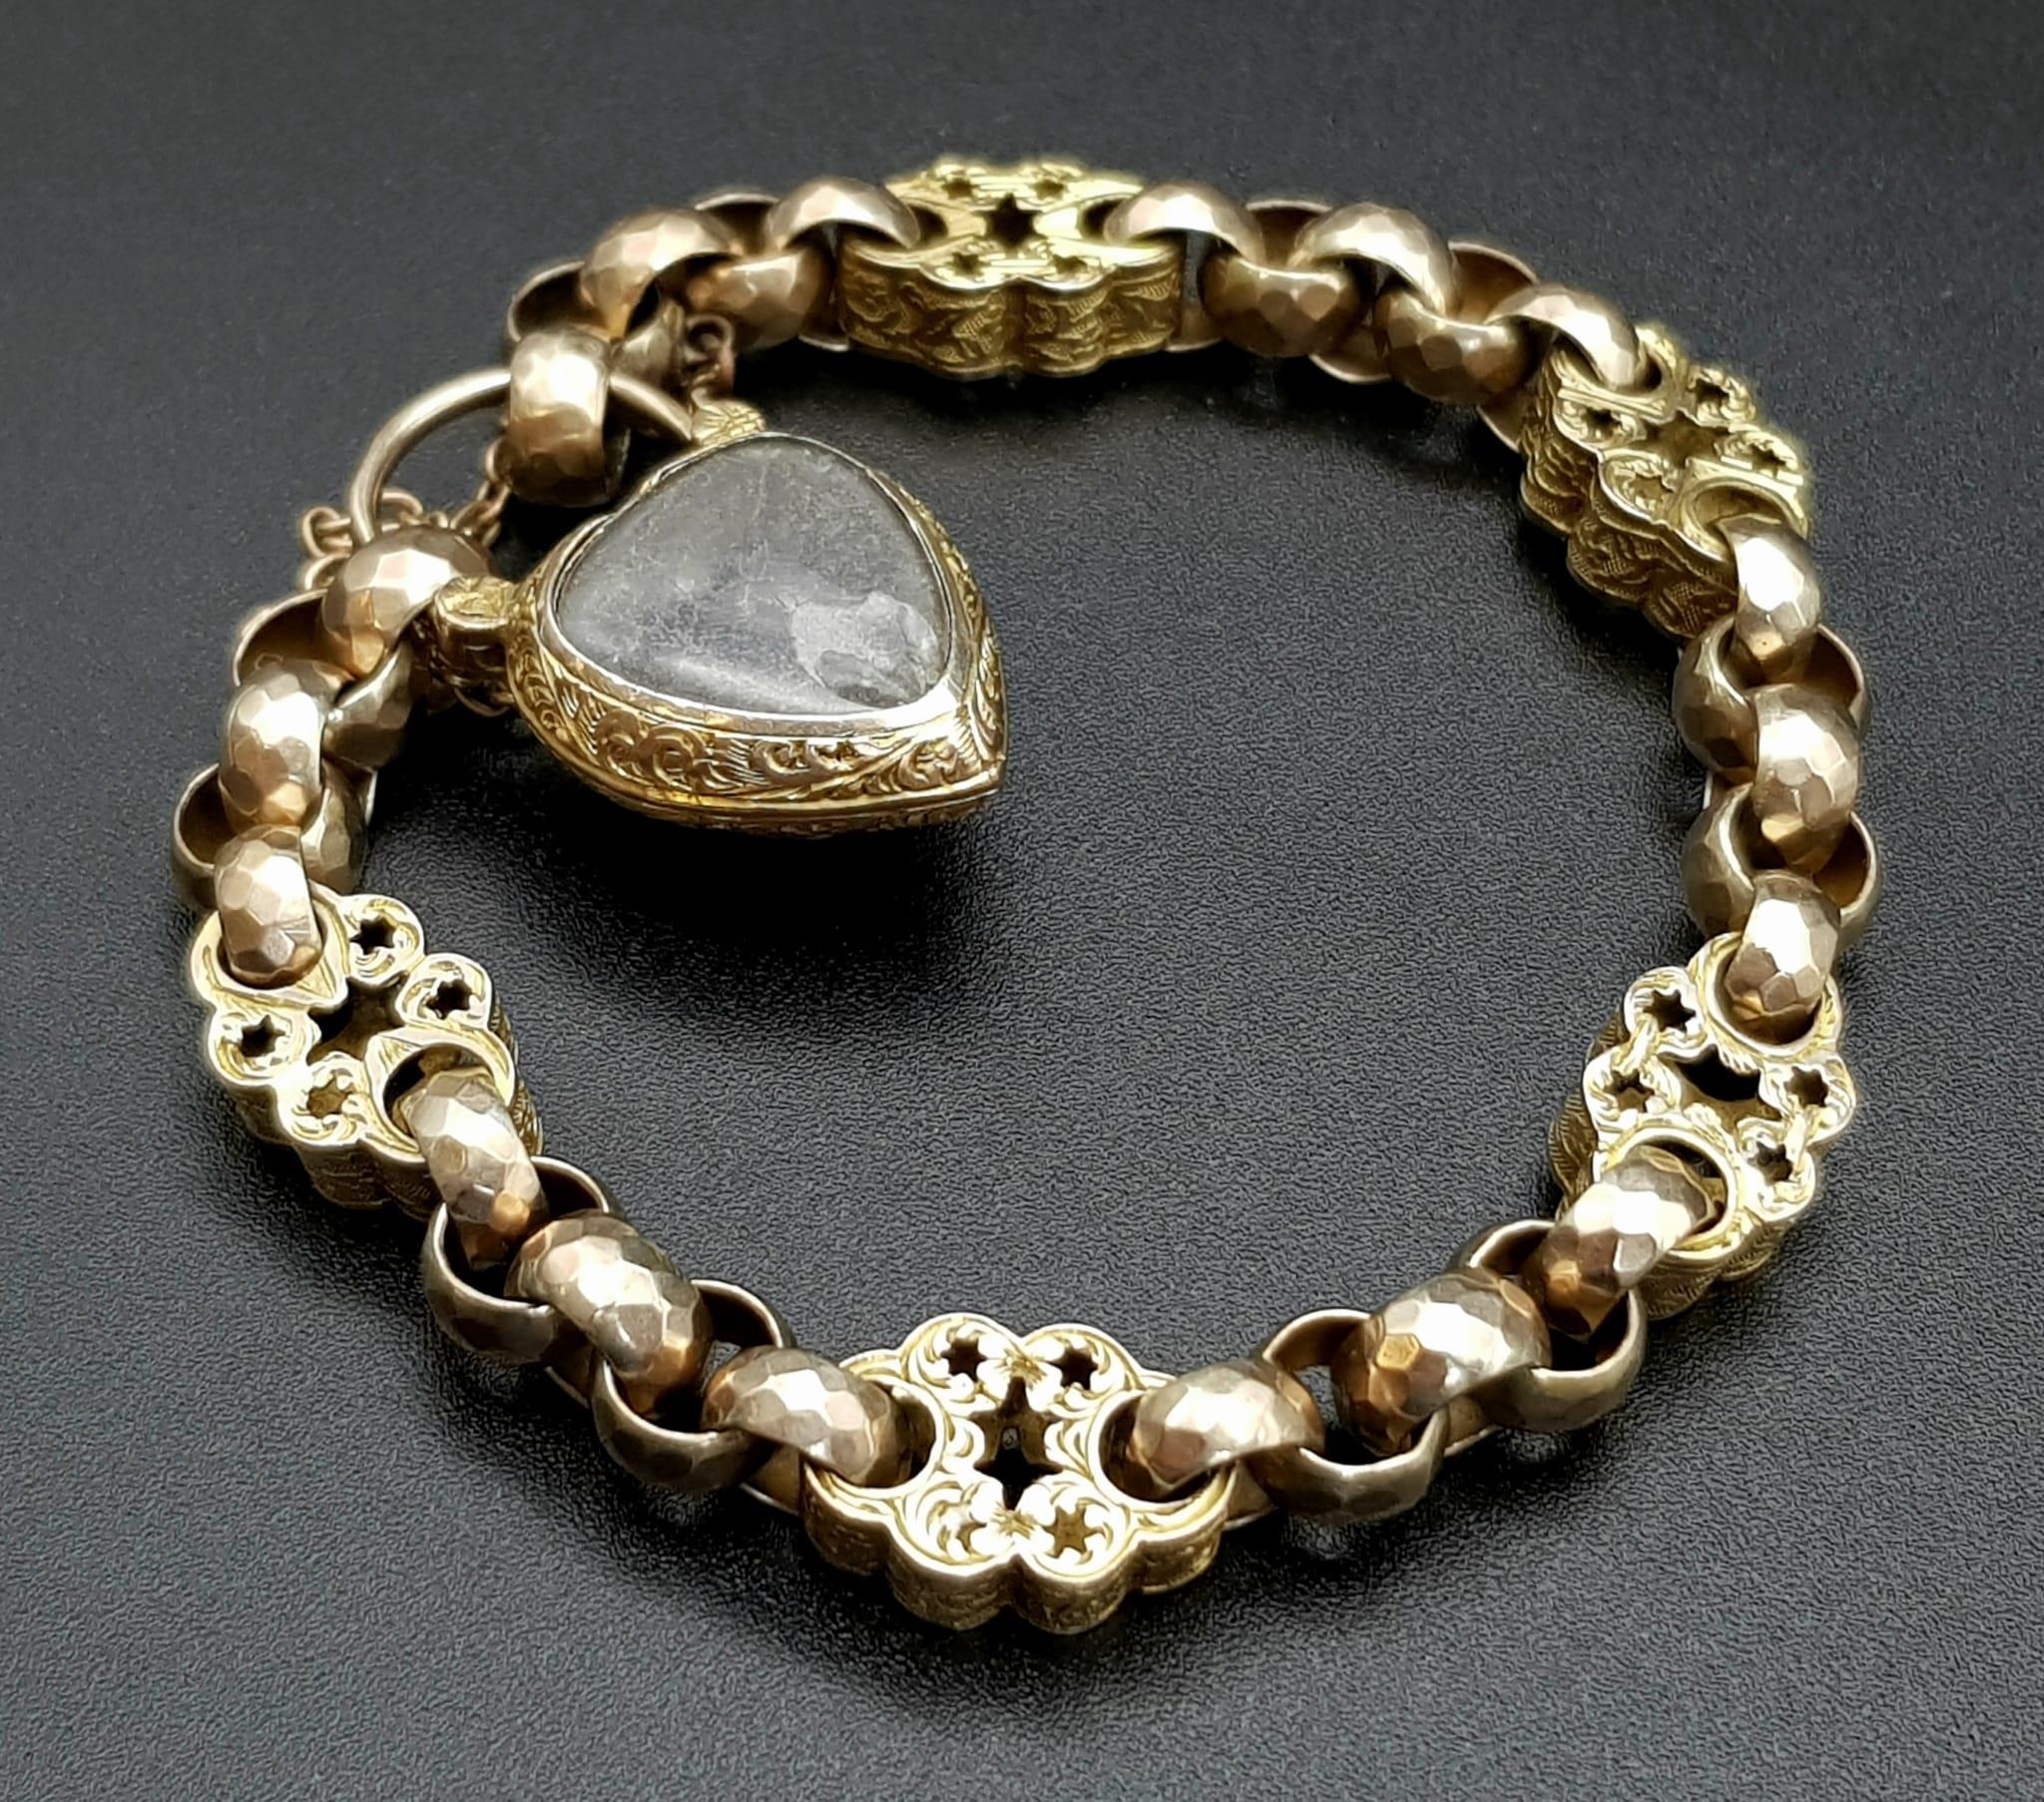 An Absolutely Splendid Victorian Hand-Made 15K Gold Bracelet. Faceted belcher links connected to - Image 4 of 7